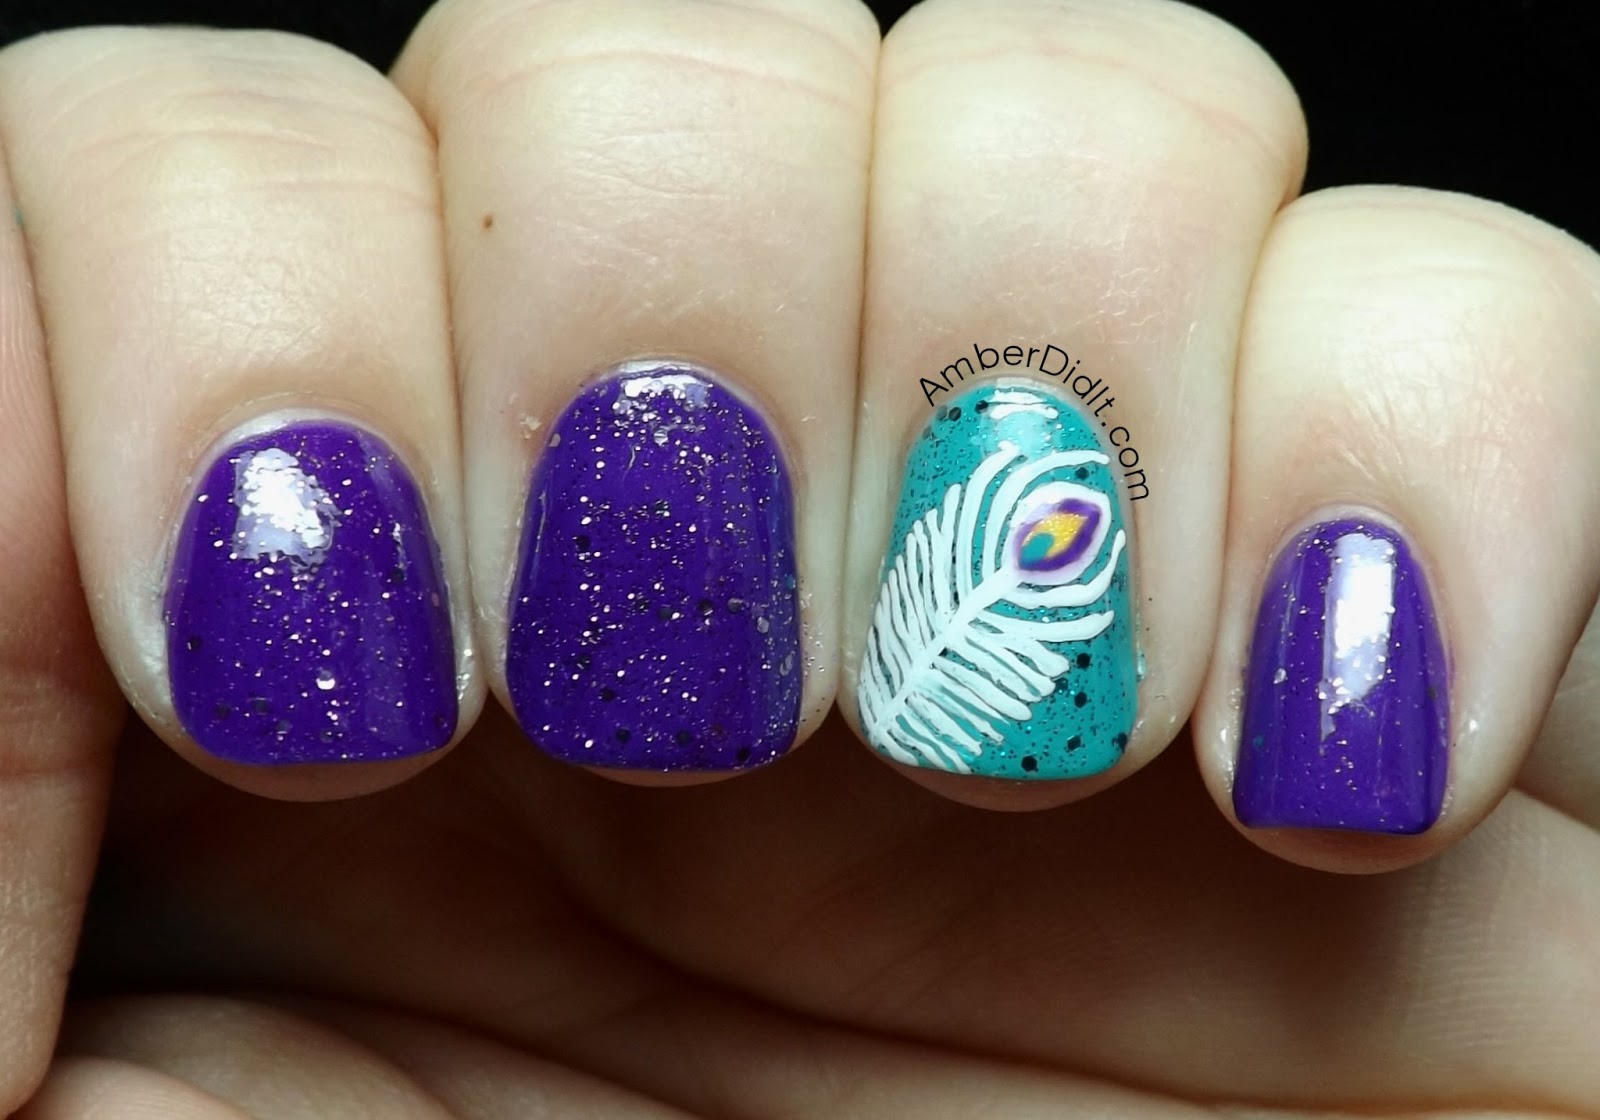 Manicure Monday: Lace Nails with Katy of Nailed It